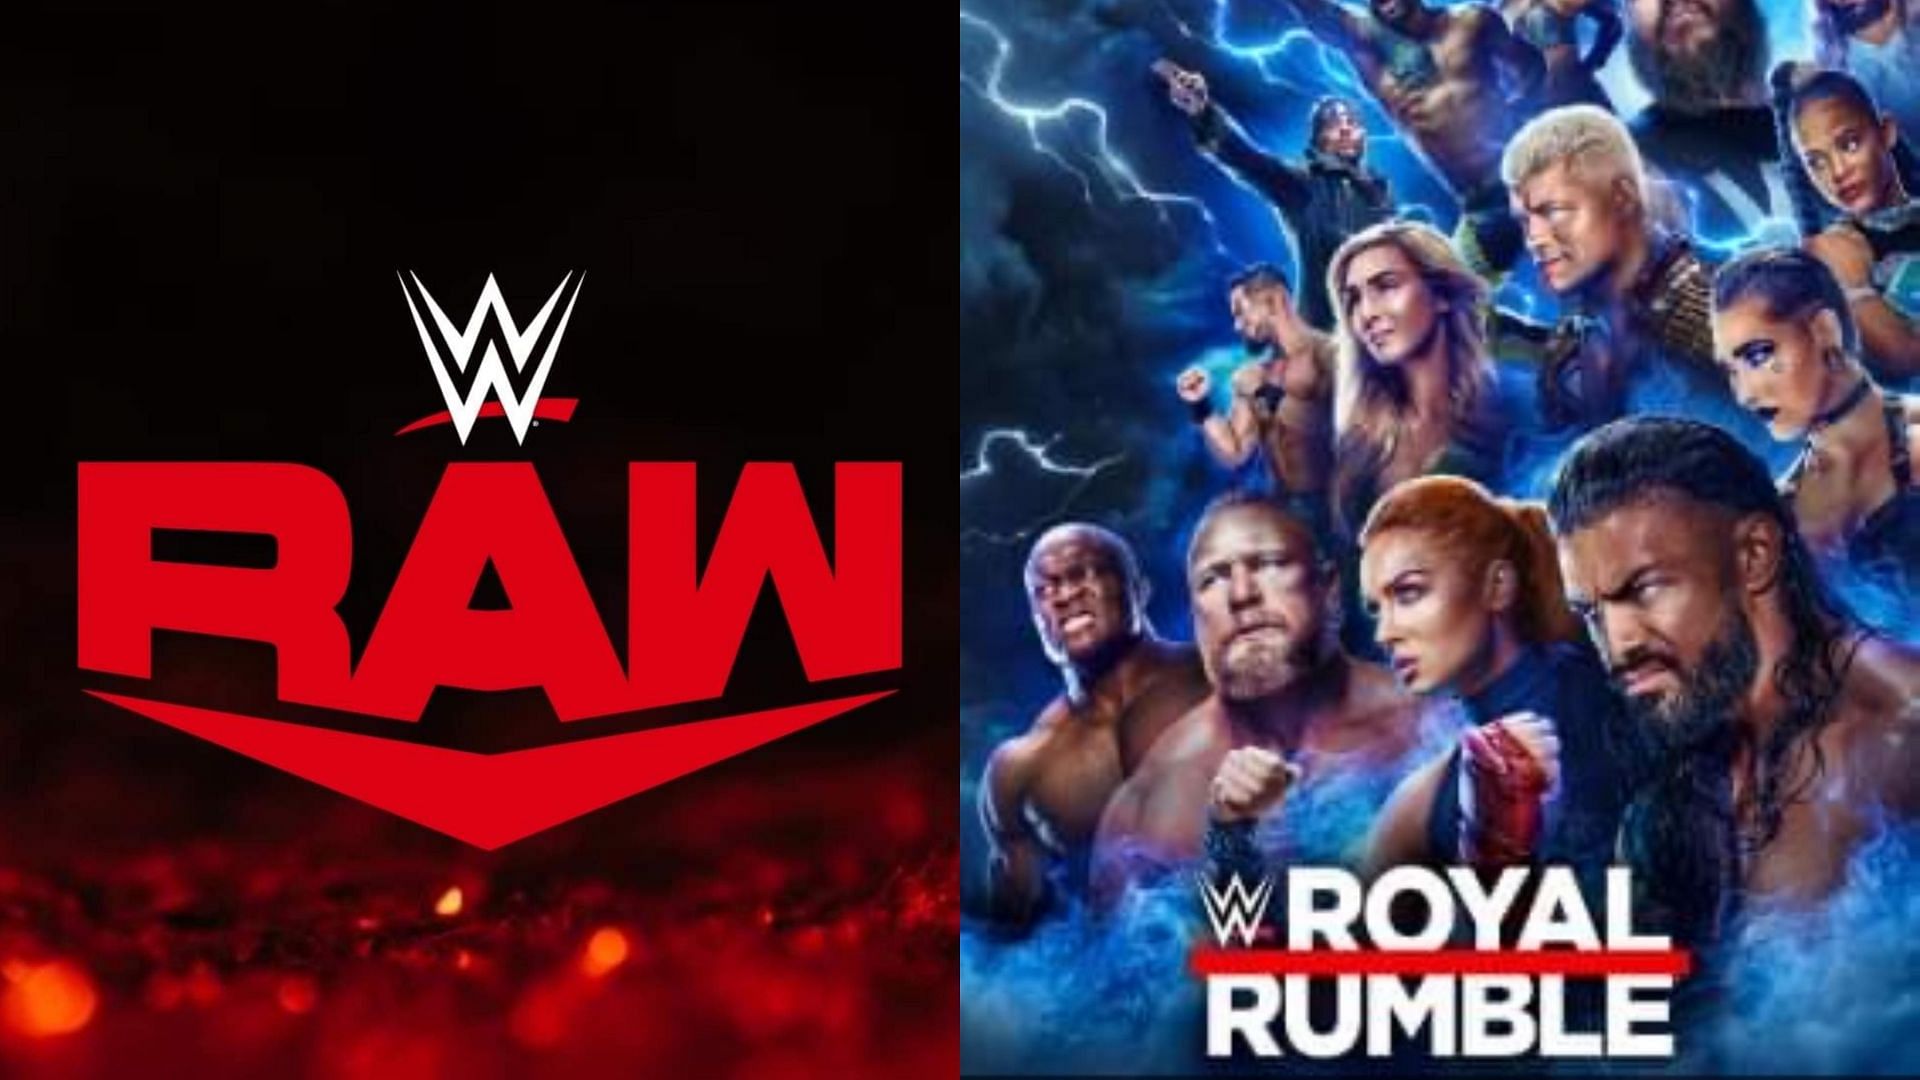 “I’ll be around” – 31-year-old WWE RAW Star teases their return for the Royal Rumble match